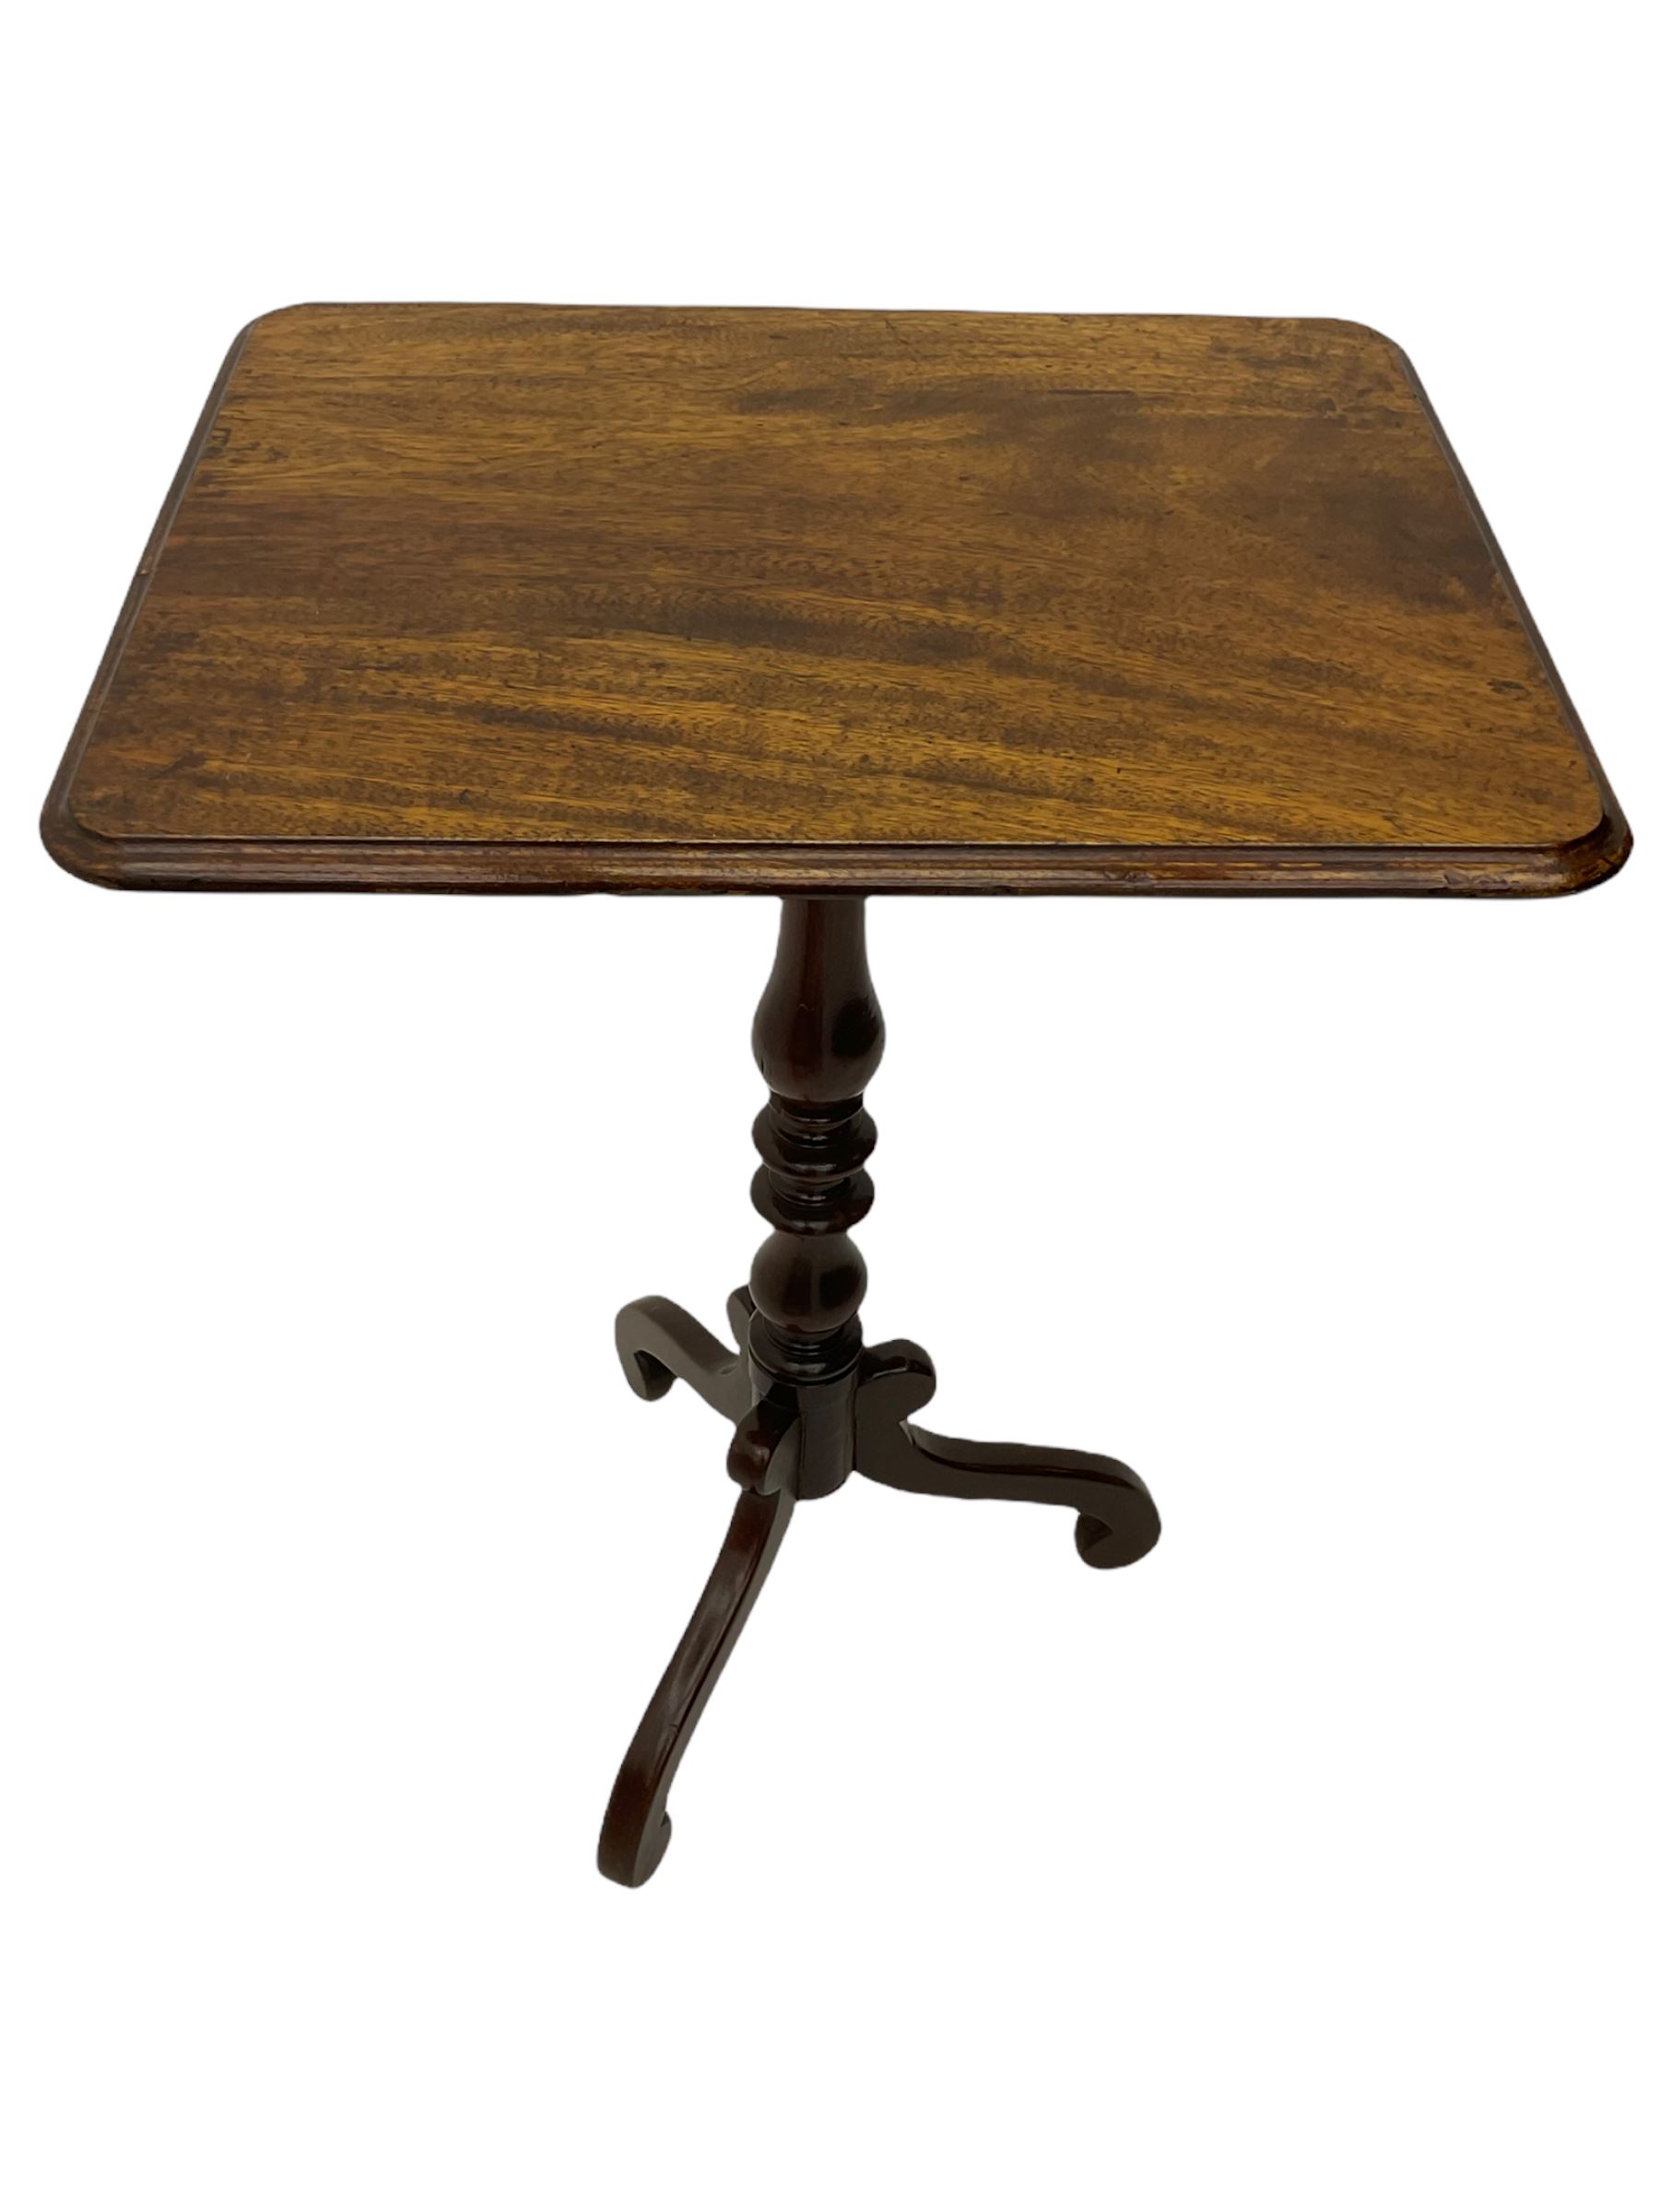 19th century tripod table - Image 2 of 5